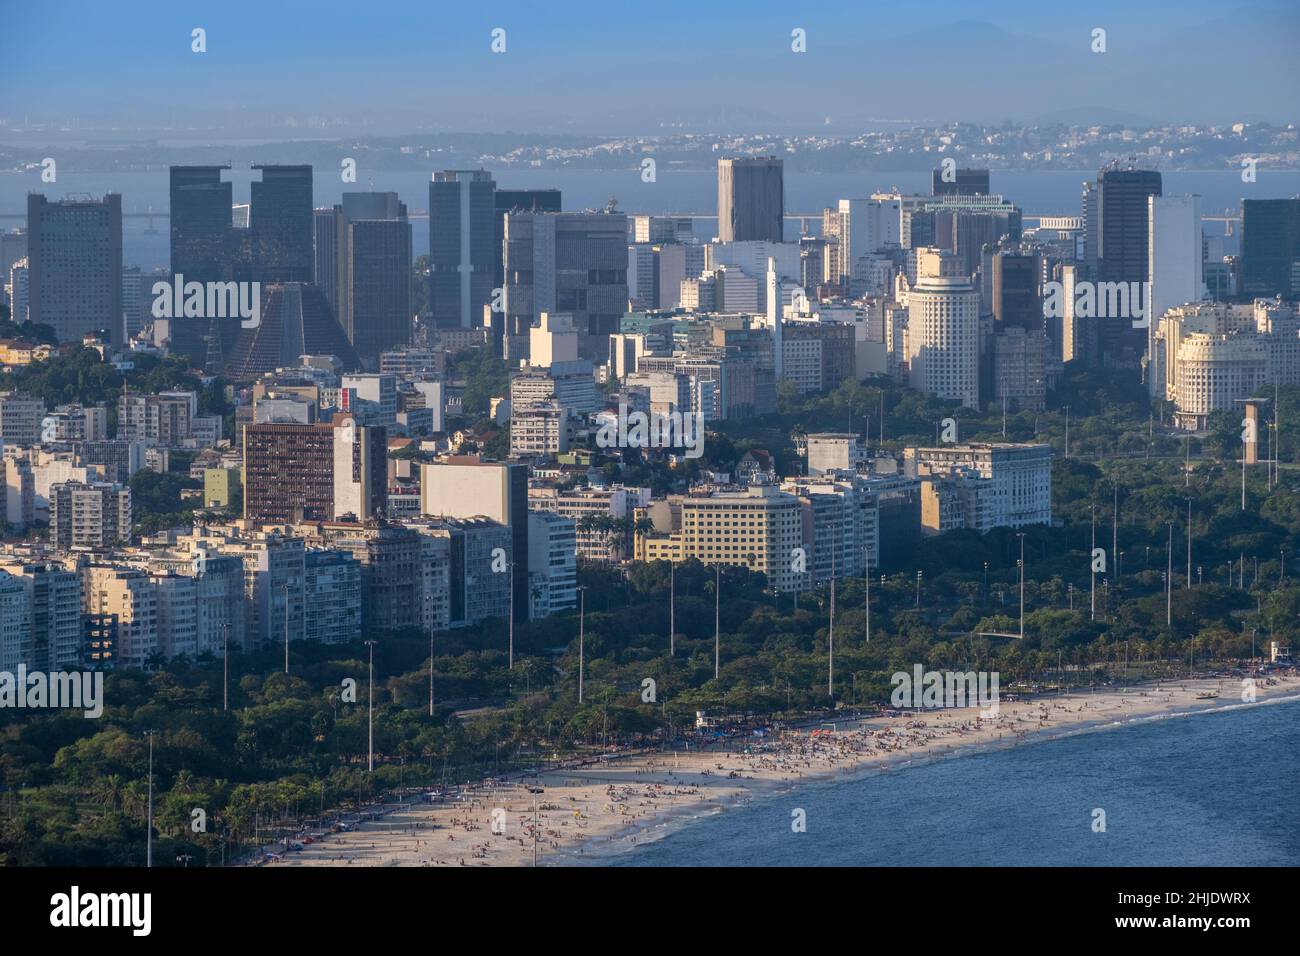 Flamengo beach, hotels & apartments in front of downtown Rio skykline - Central Business District (CBD), with Petrobras building & City cathedral Stock Photo